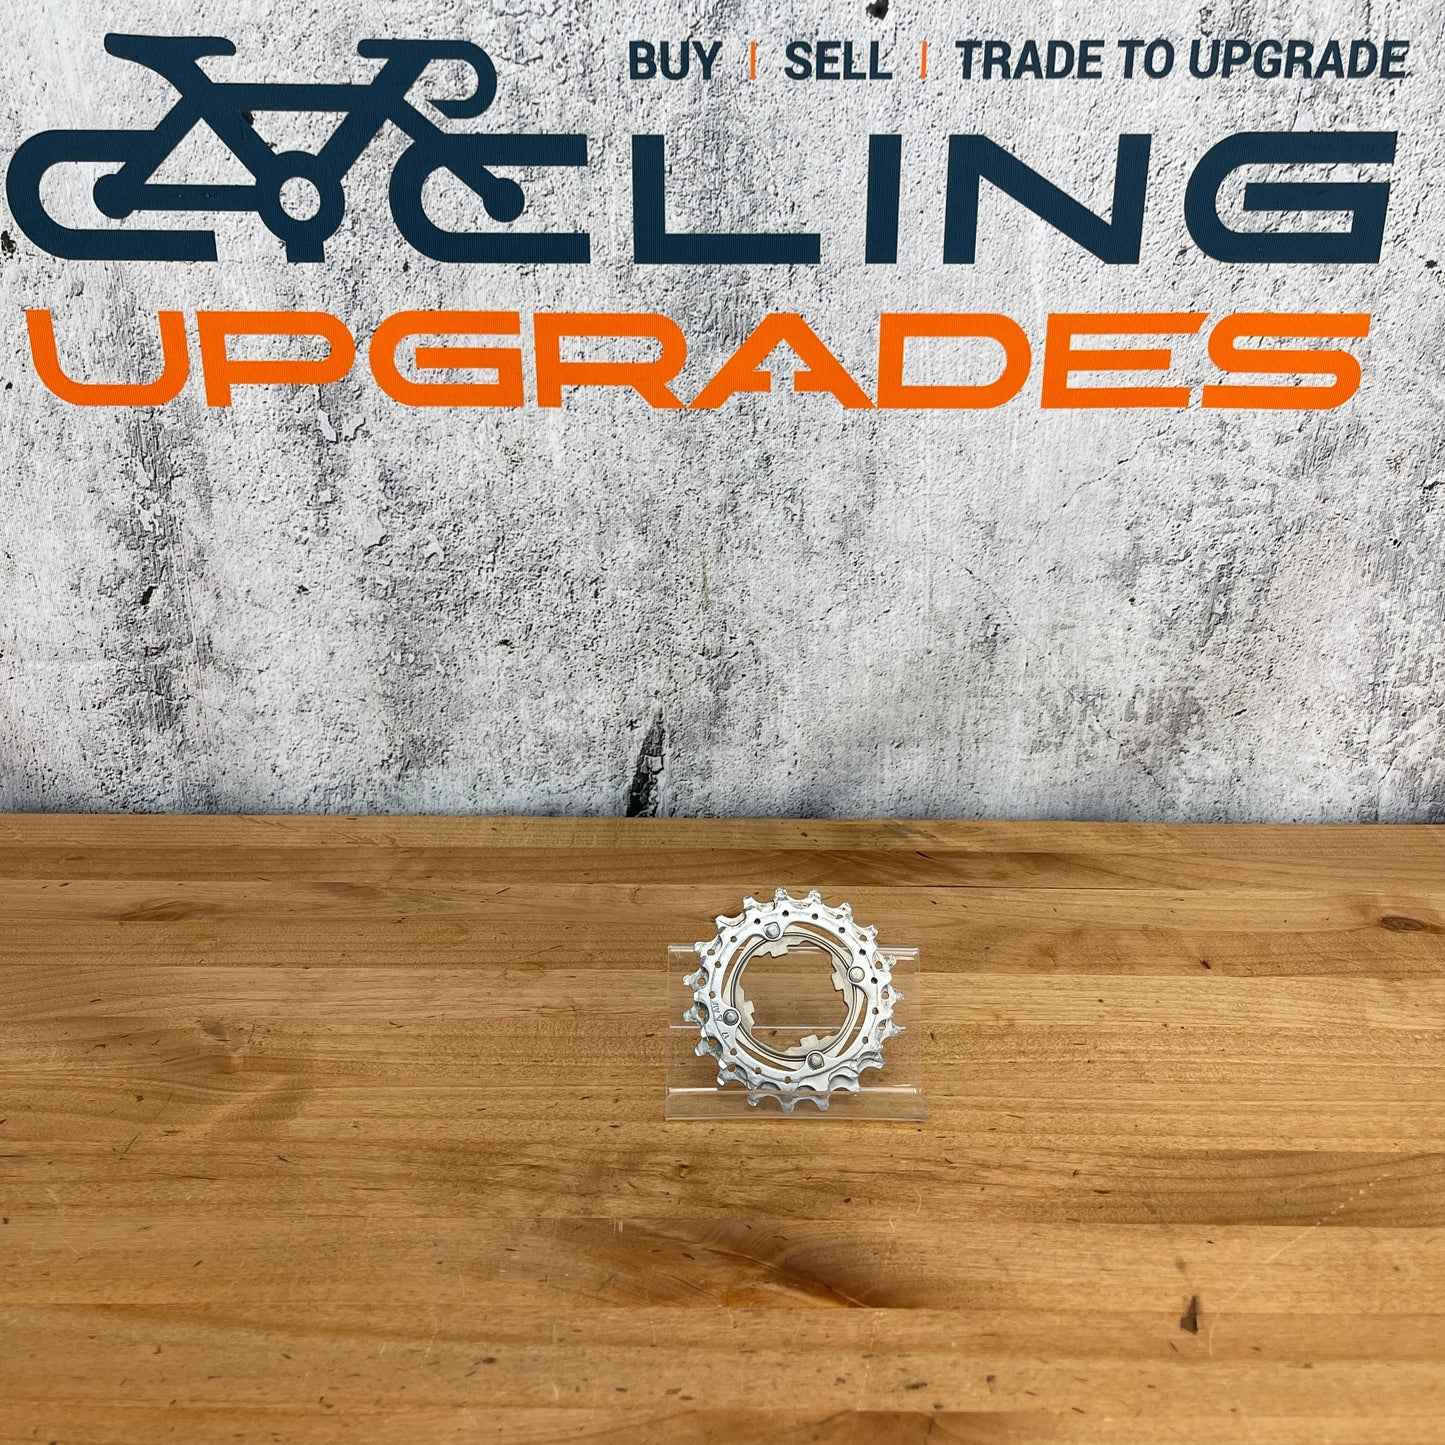 Campagnolo Chorus Ultra Drive 10-Speed 17/19t Cassette Sprocket